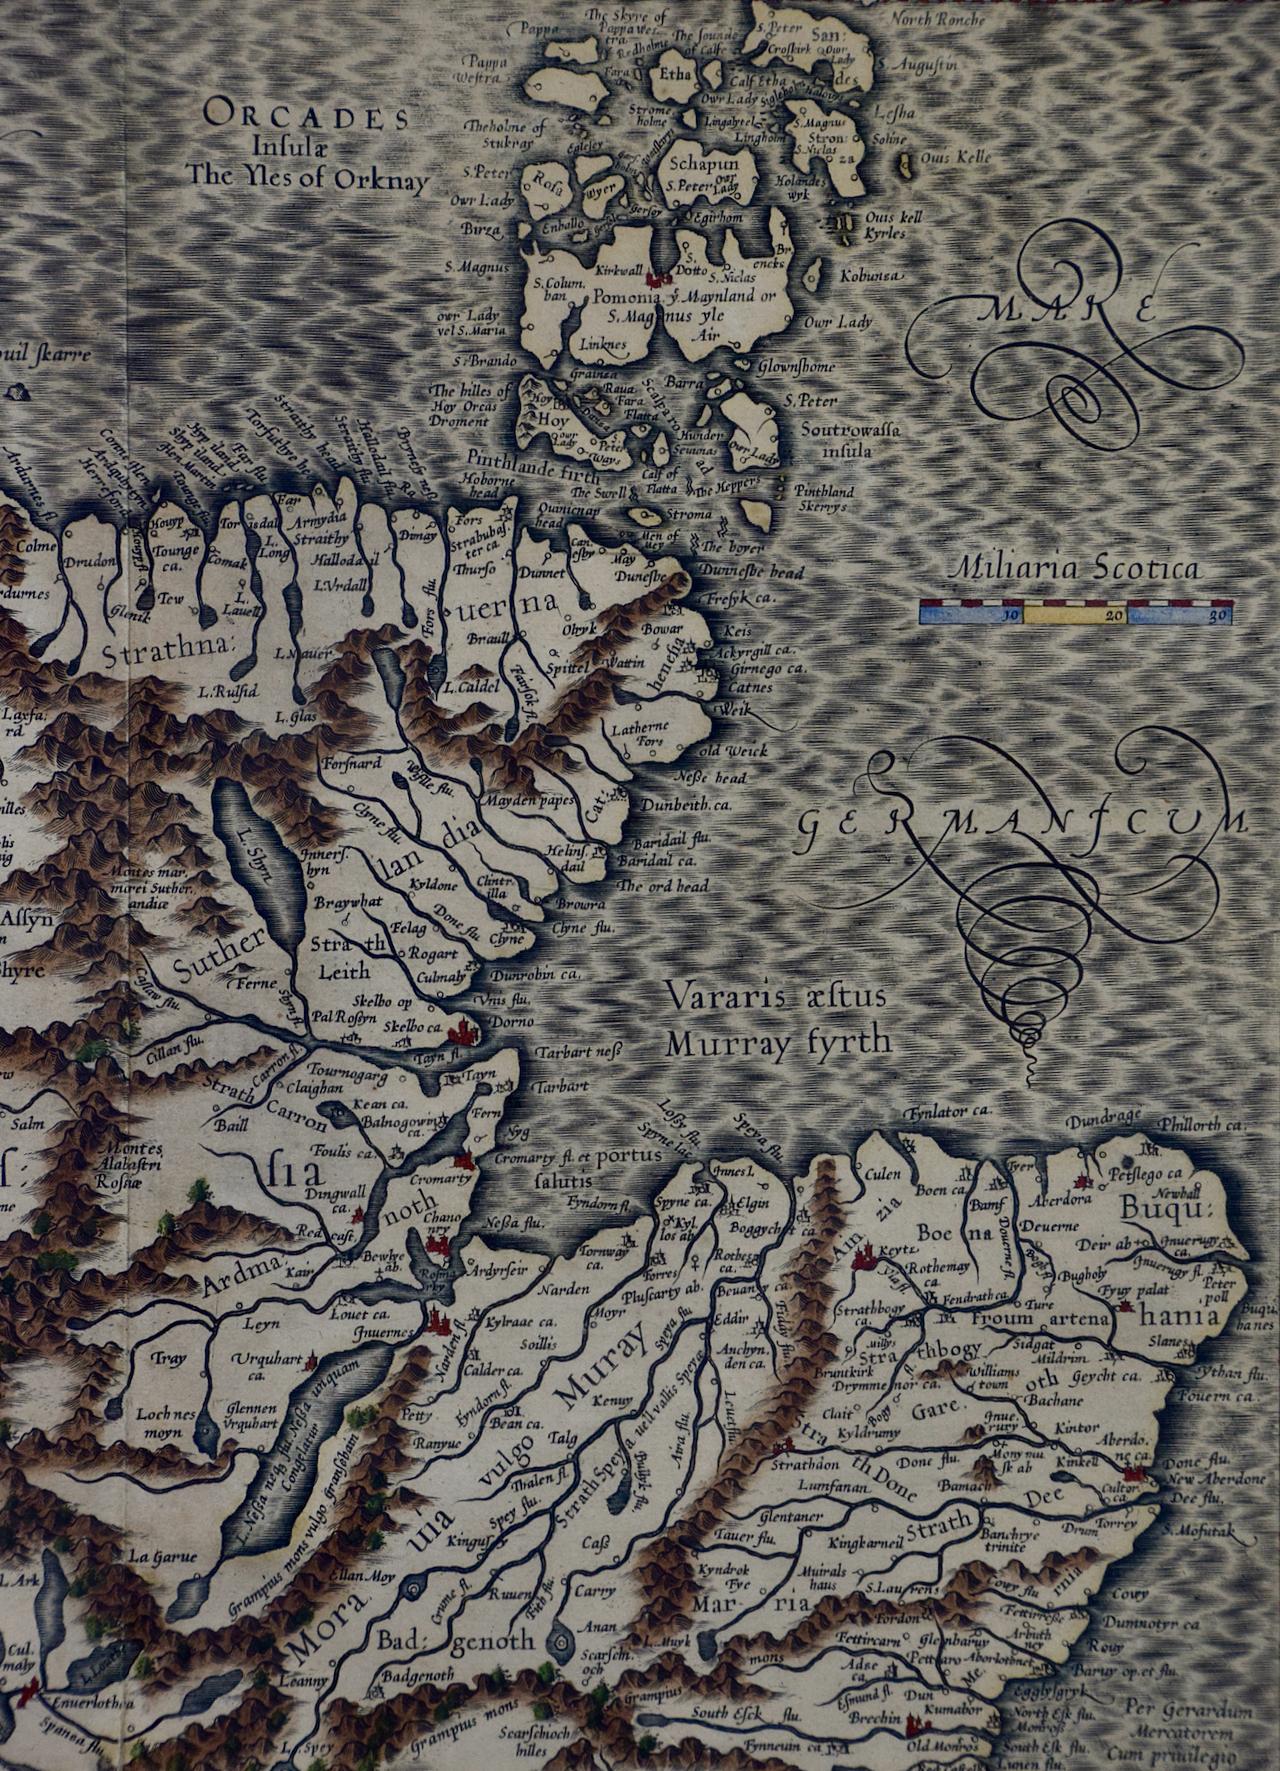 Northern Scotland: 16th Century Hand-colored Map by Mercator - Other Art Style Print by Gerard Mercator